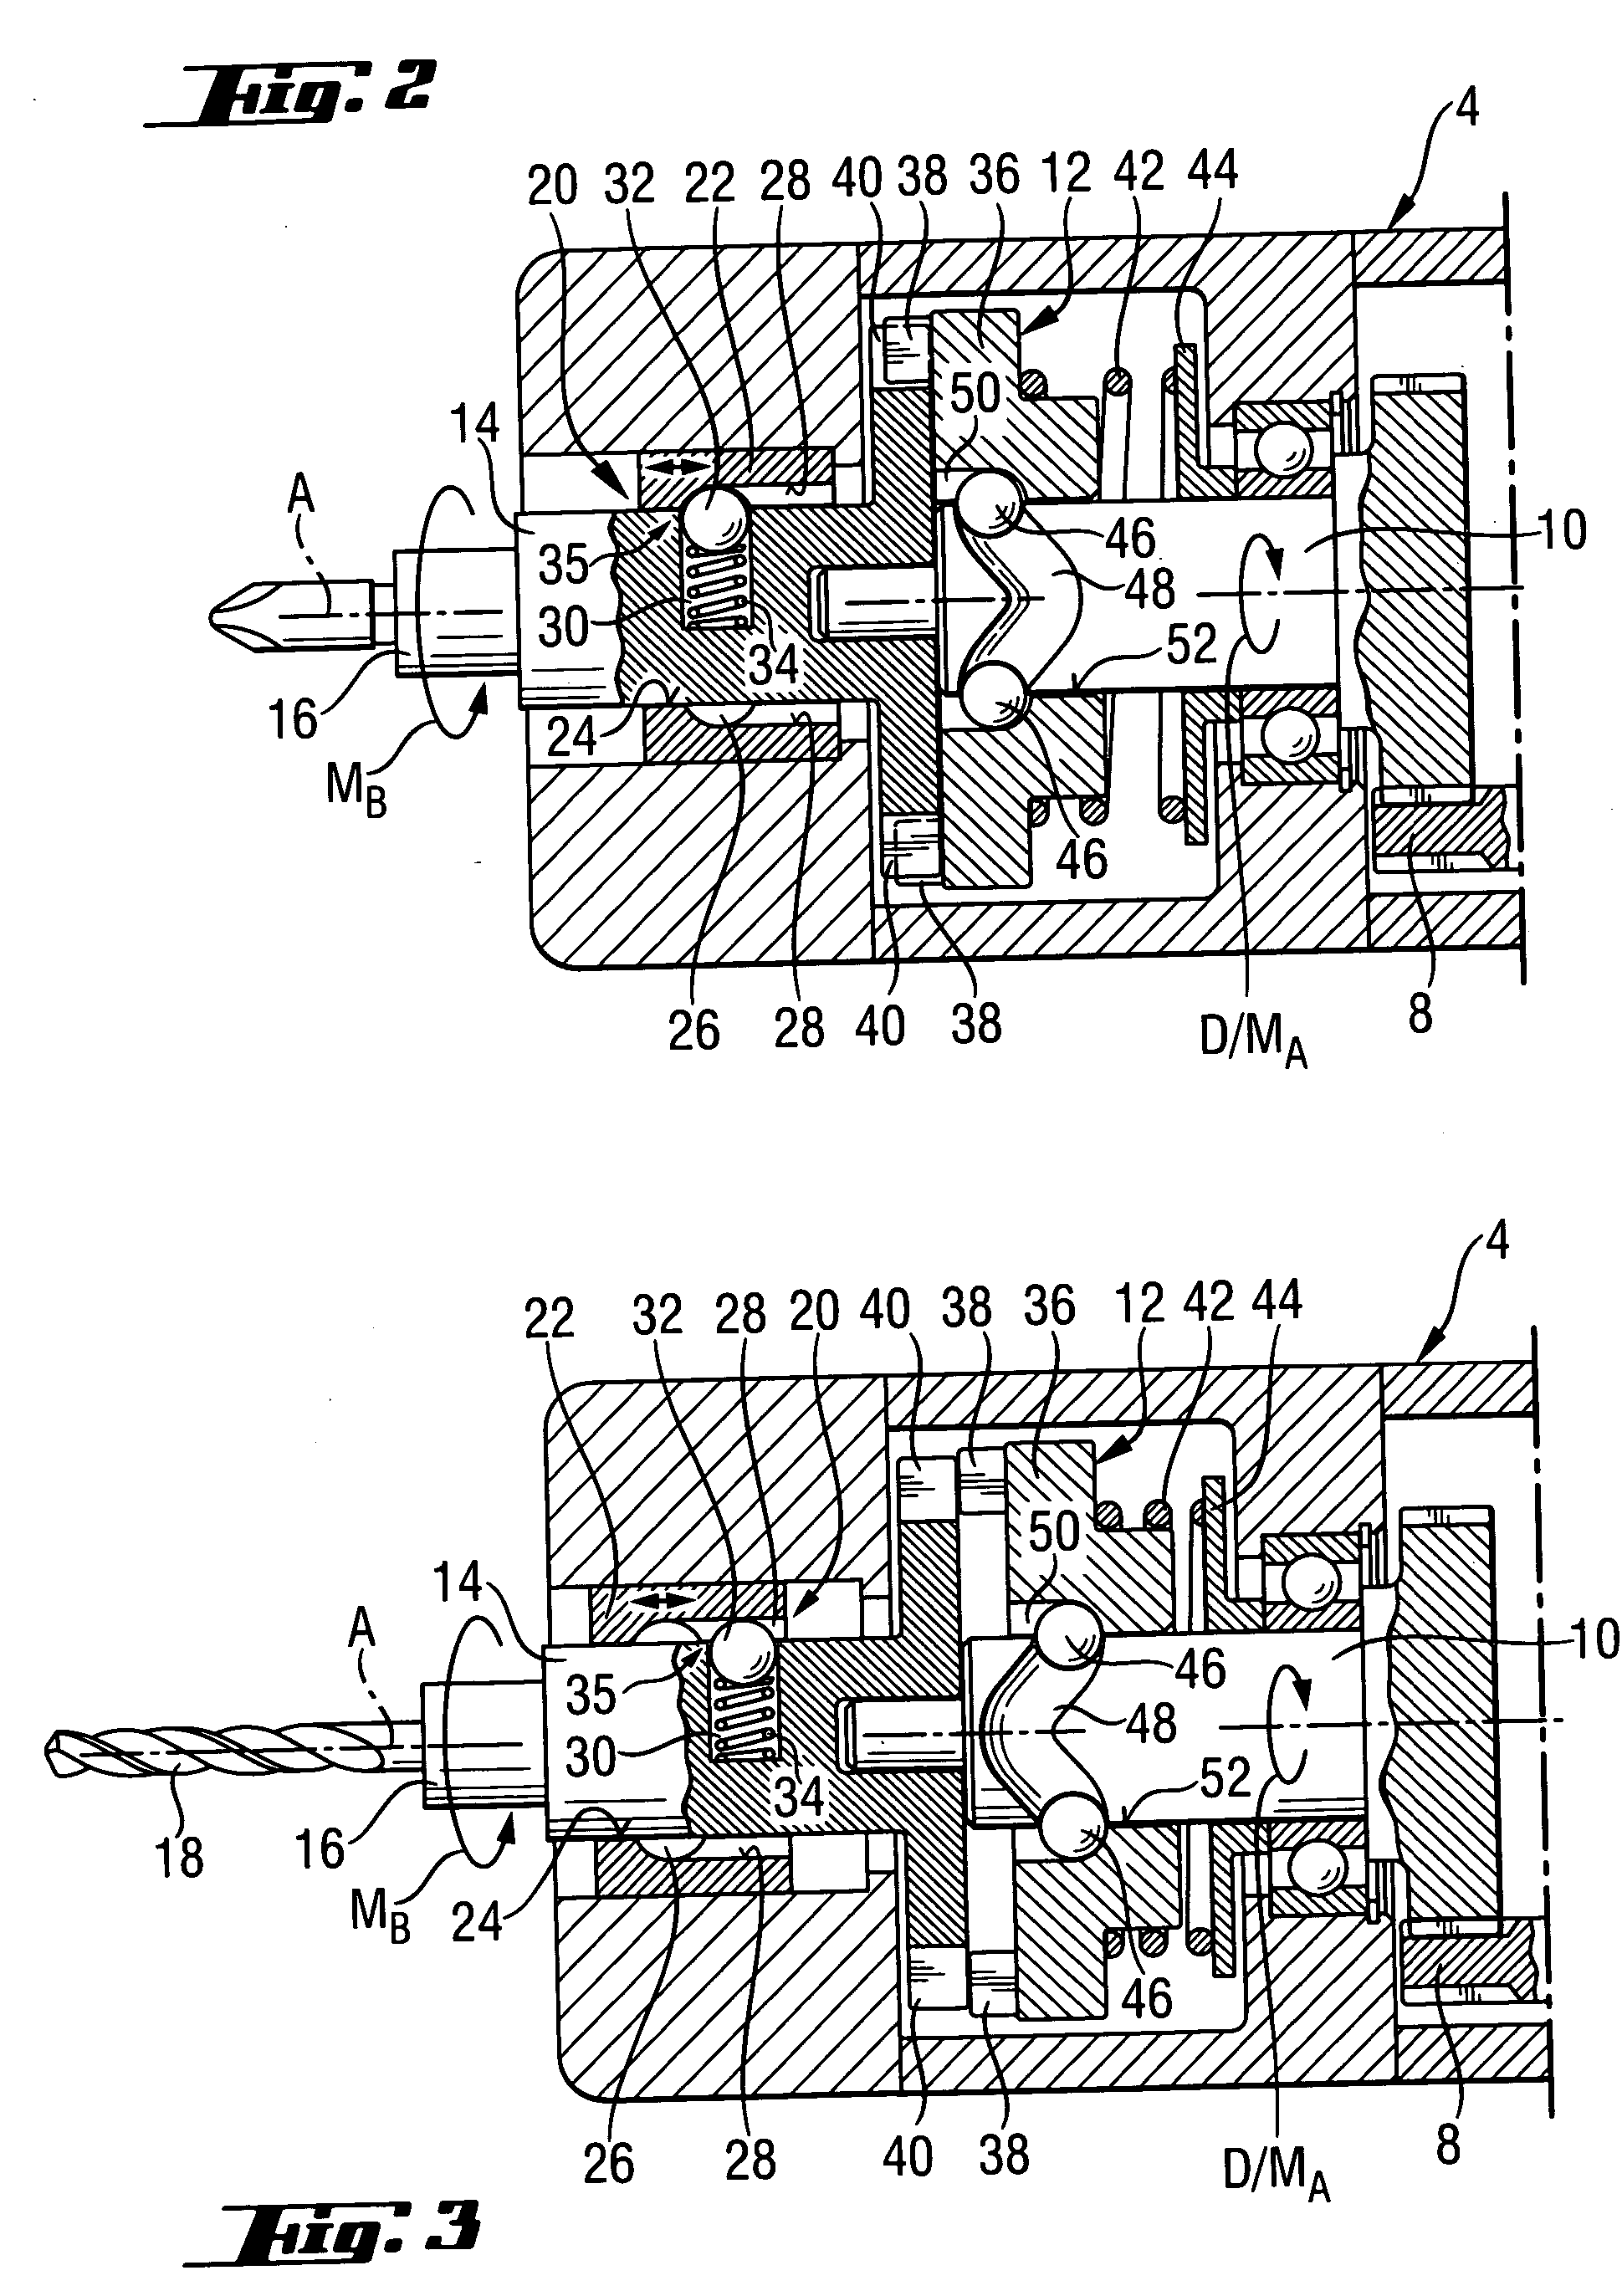 Power tool with an intermittent angular torque pulse